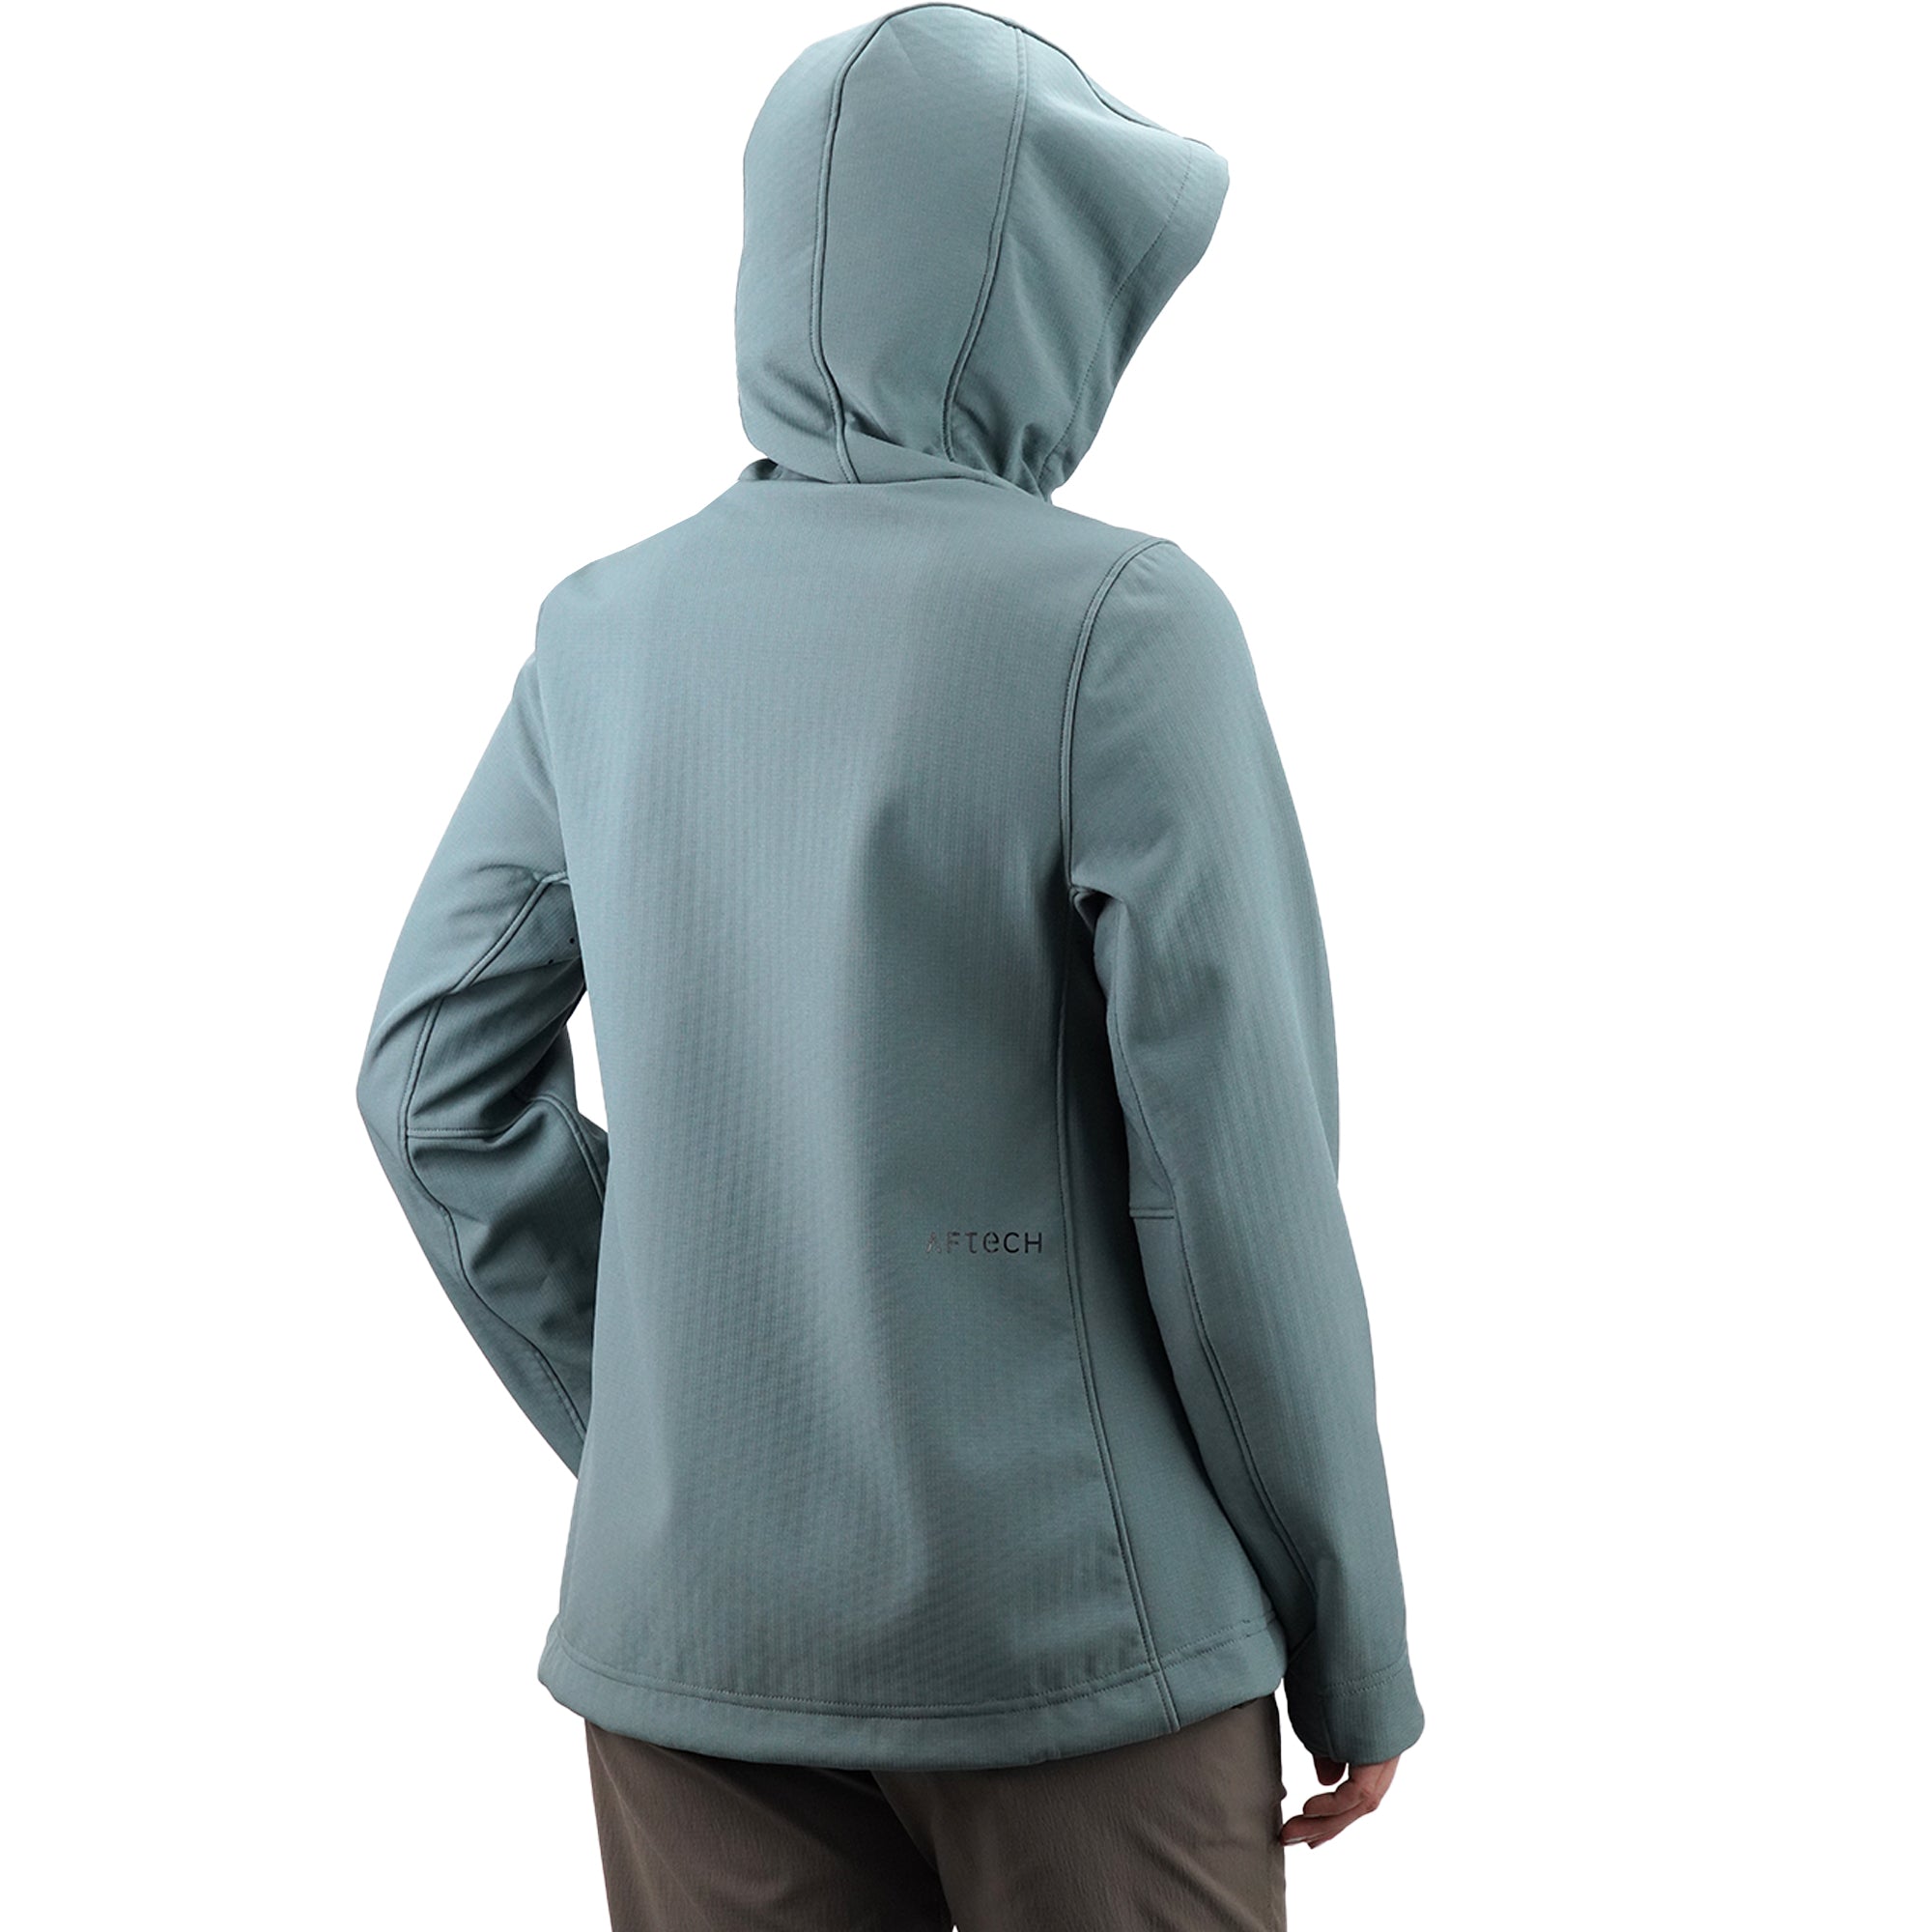 Womens Reaper Windproof Jacket - Softshell Zip Up | AFTCO